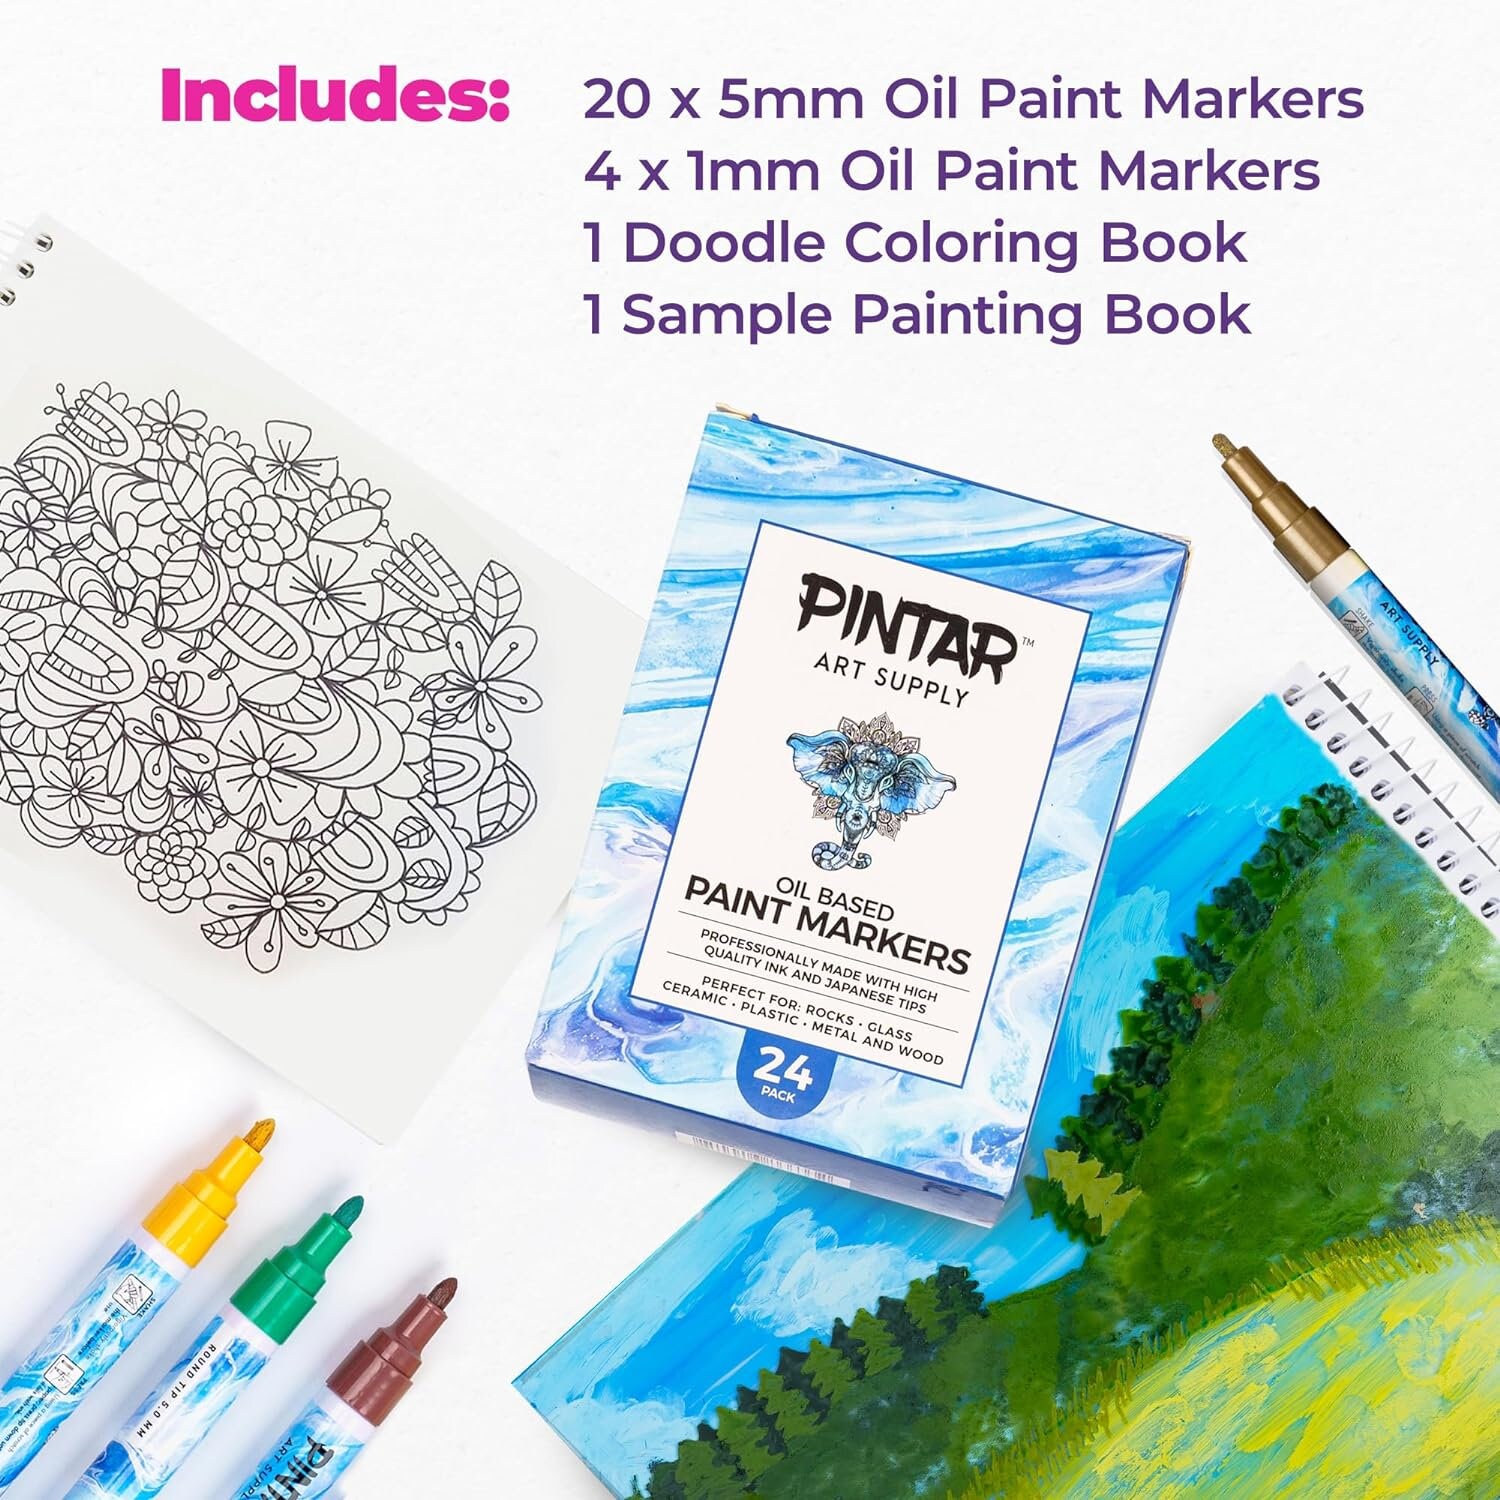 PINTAR Premium Oil Paint Pens - (24-Pack) 20 Medium Tip(5mm) & 4 Fine  Tip(1mm) Vibrant Colored Pens For Rock Painting, Ceramic, Glass, Wood,  Paper & Fabric. Paint Markers, Craft Supplies, DIY projects 